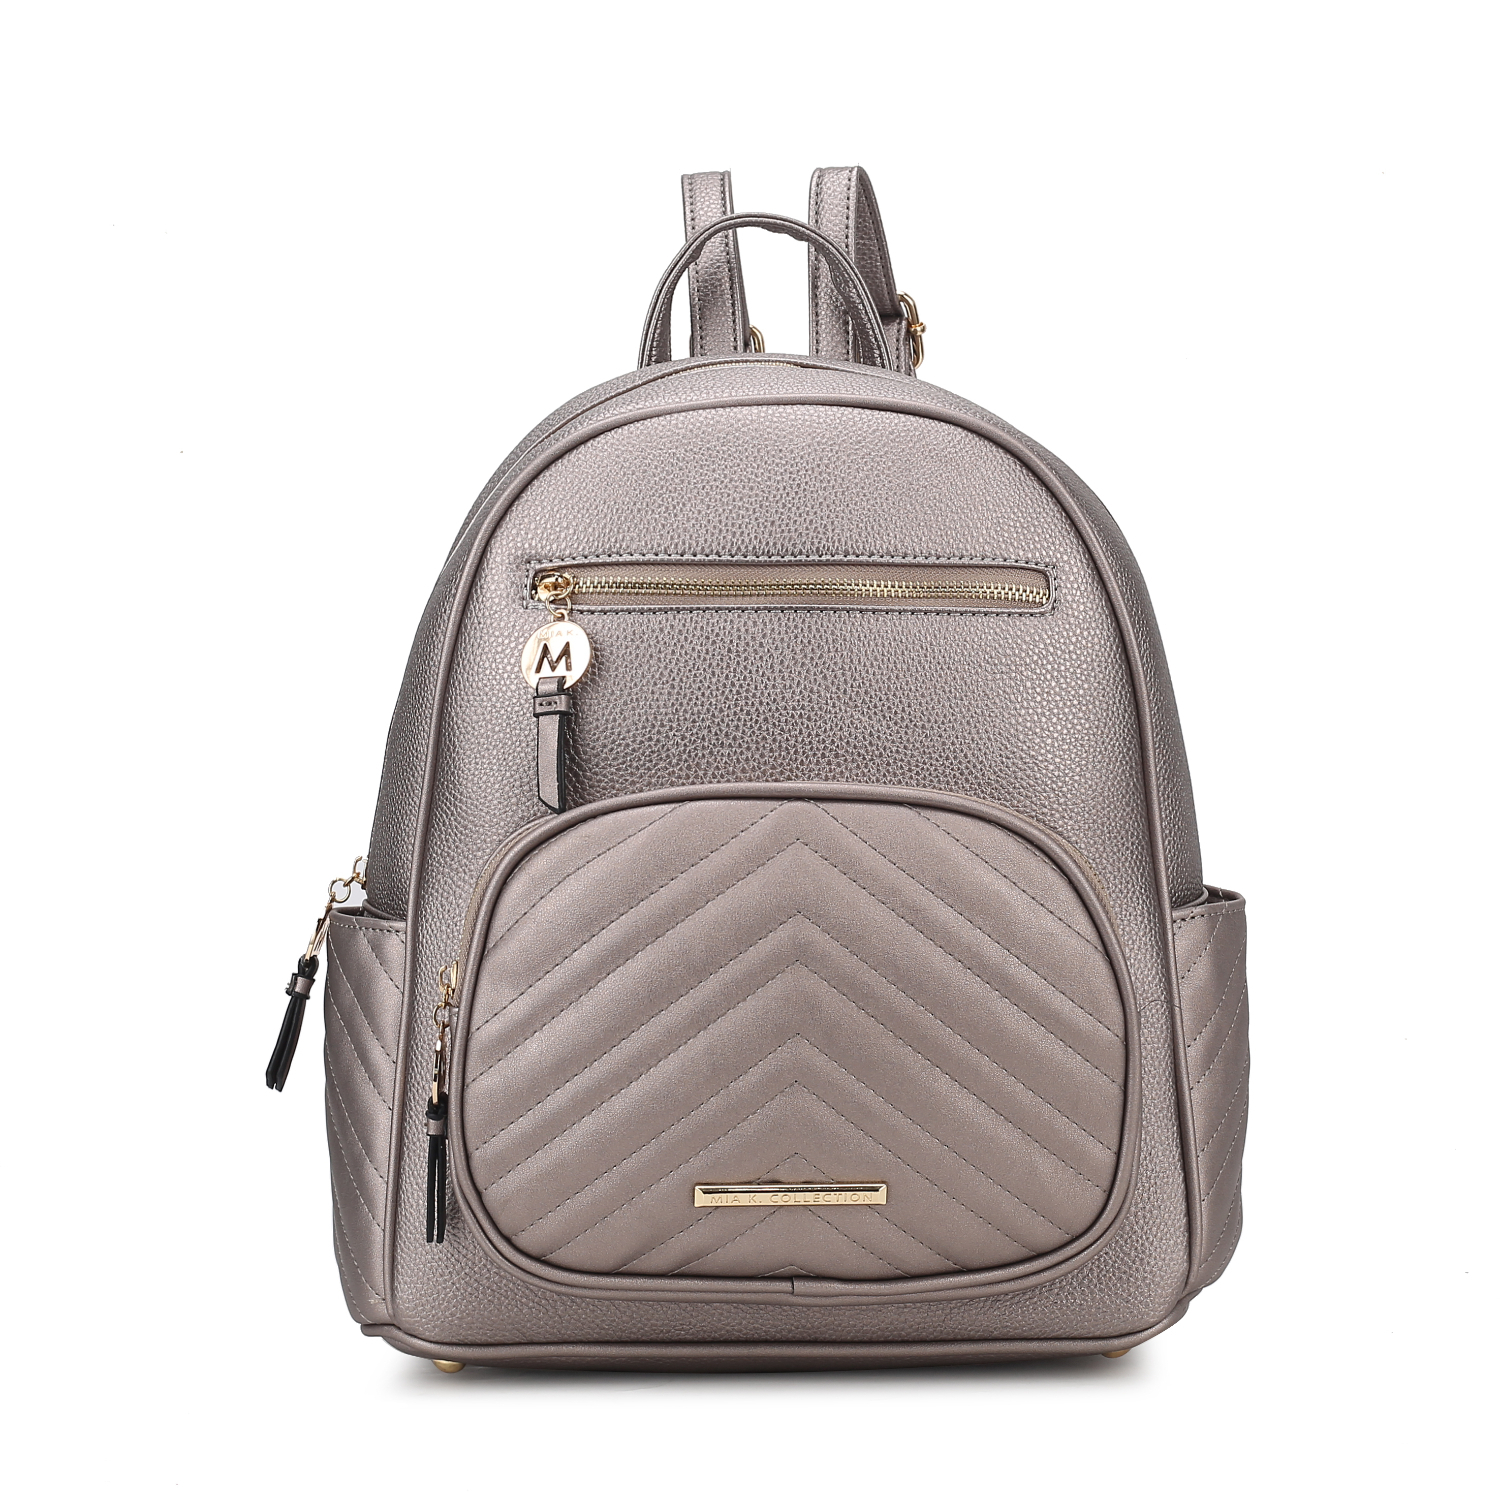 MKF Collection Romana Vegan Leather Womens Backpack By Mia K - Pewter